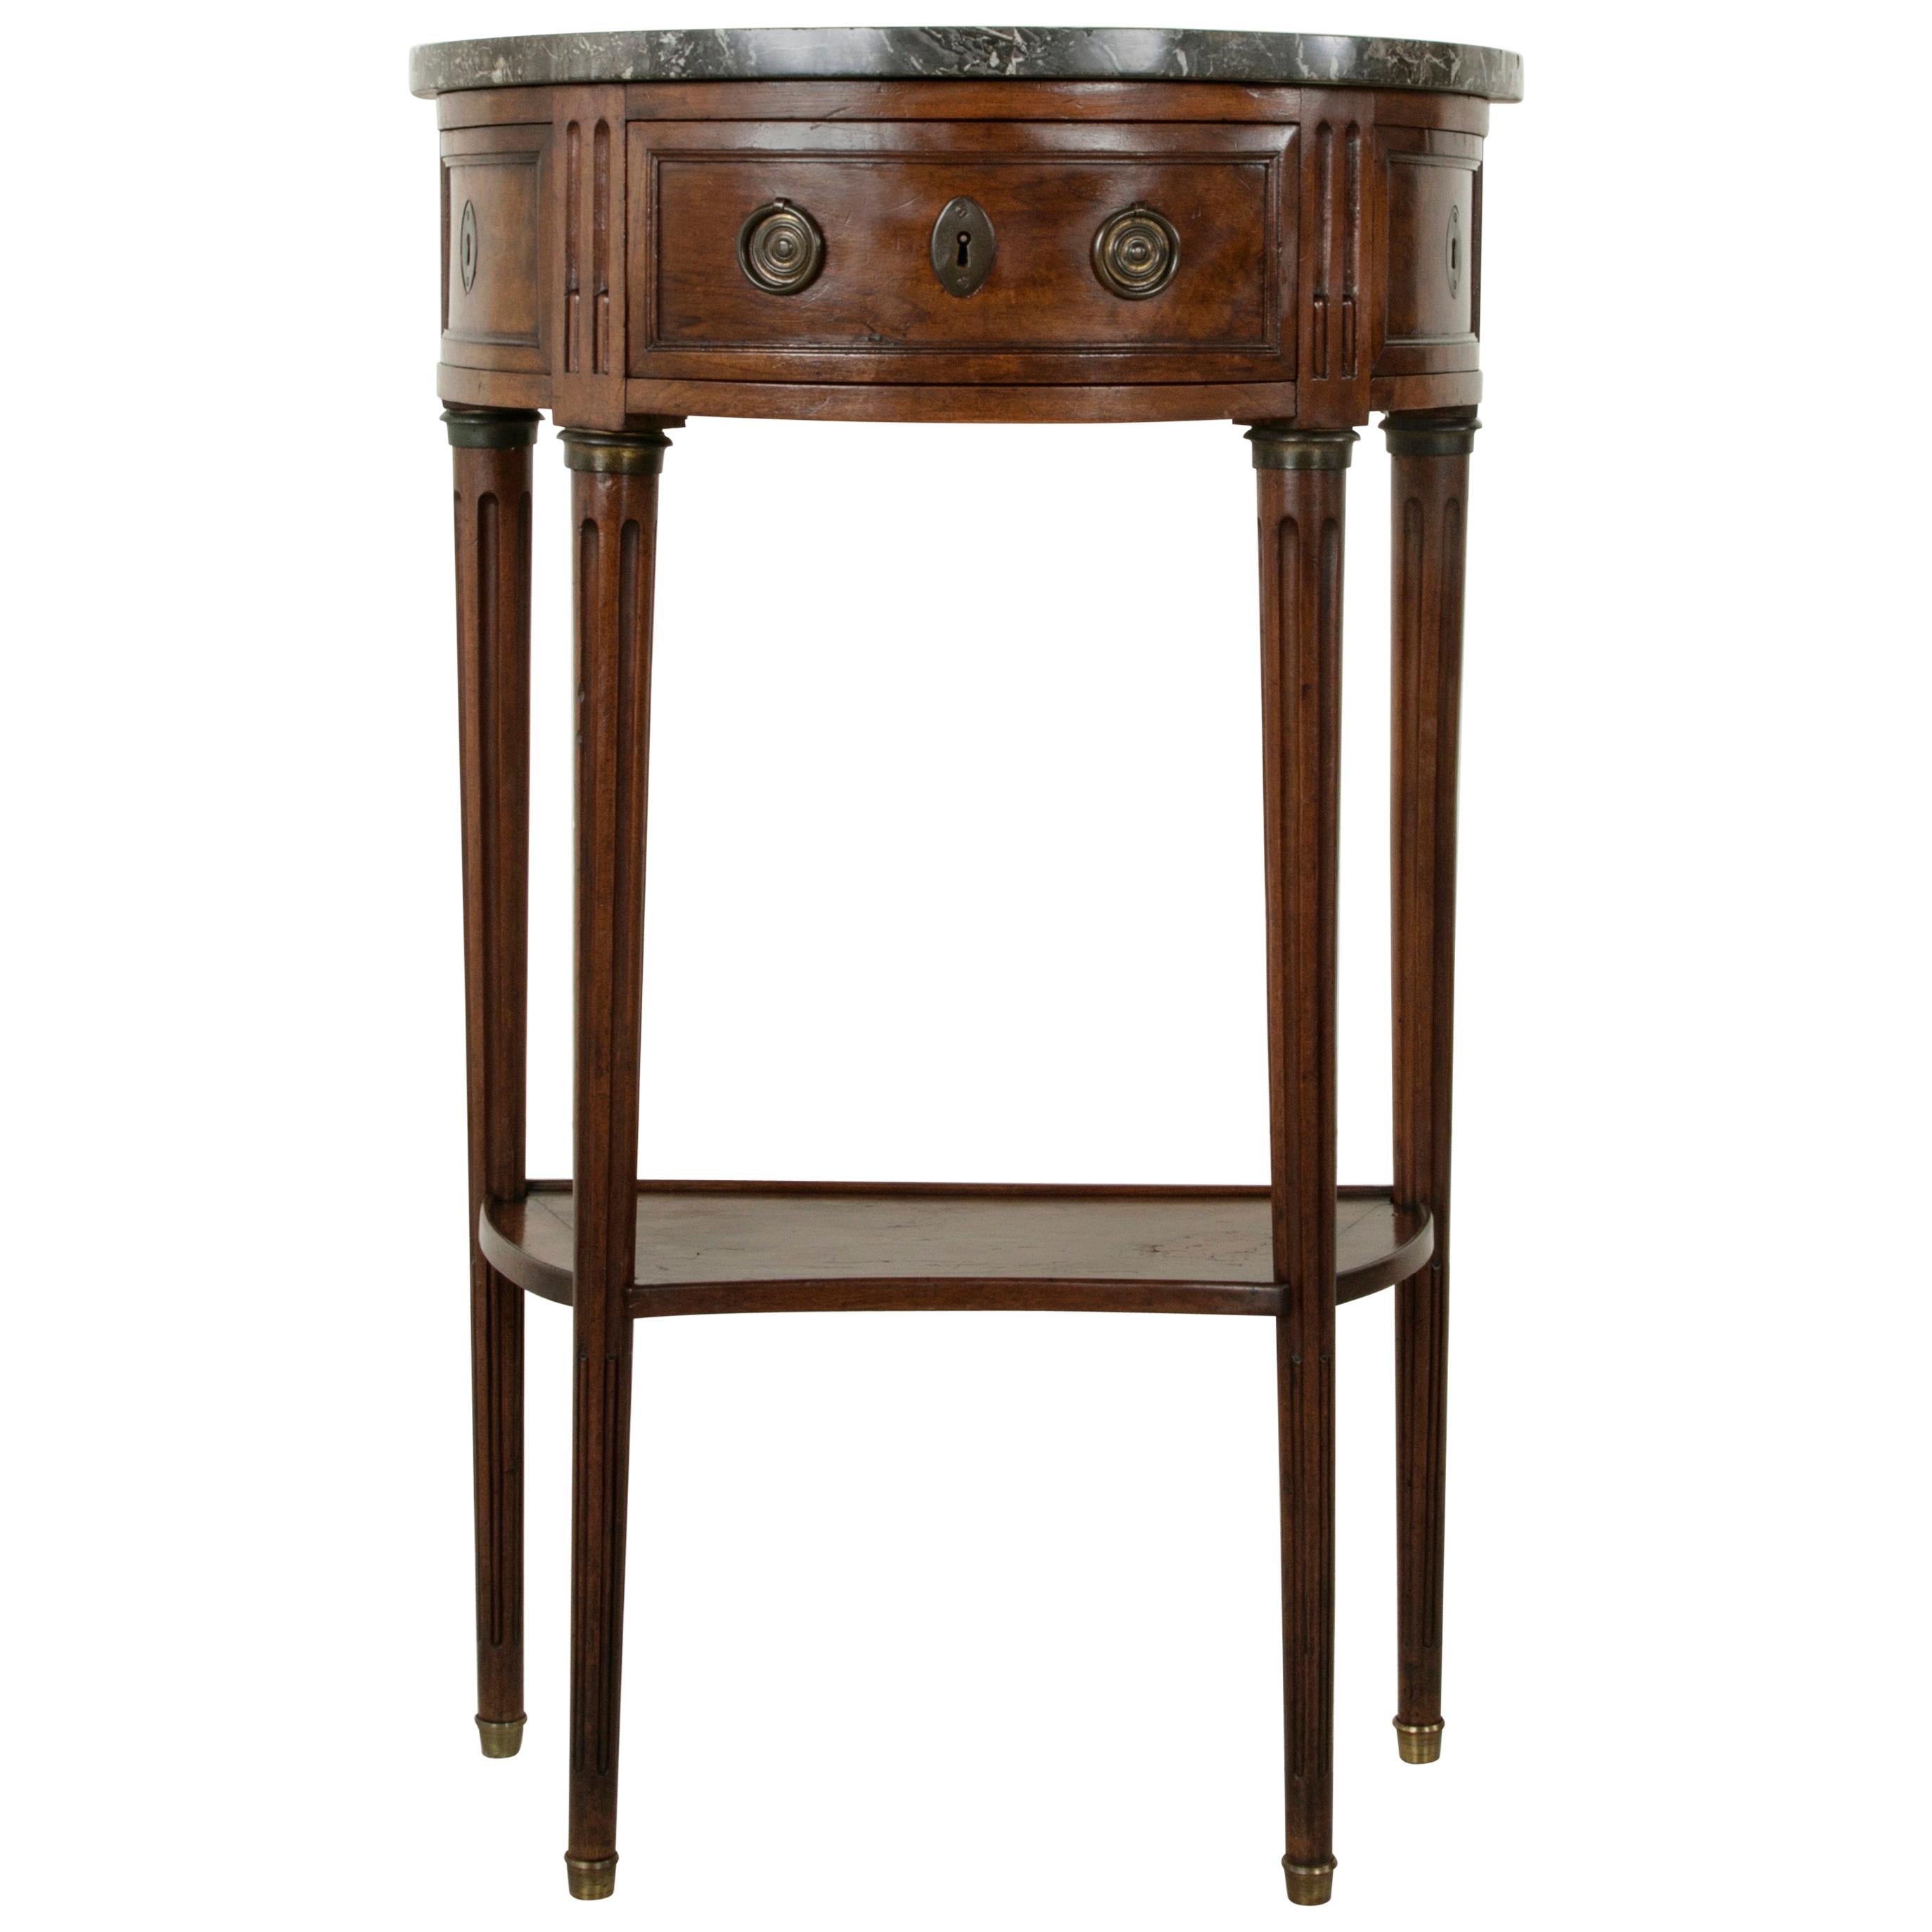 Late 18th Century French Louis XVI Period Walnut Console Table with Marble Top